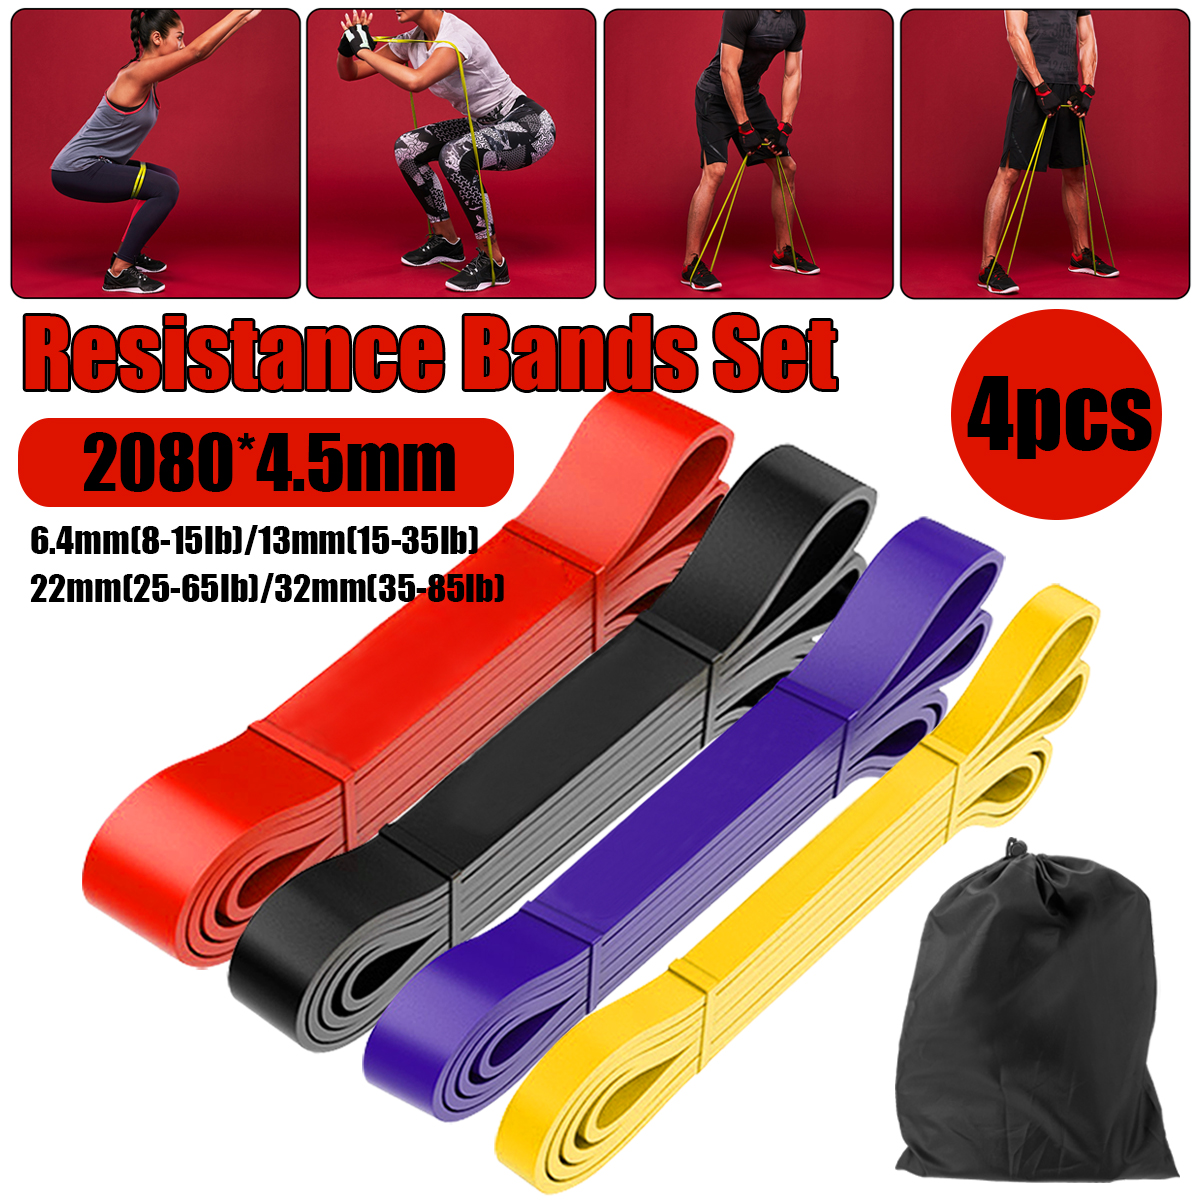 4pcs-8-85lb-2080x45mm-Resistance-Bands-Set-Heavy-Duty-Exercise-Elastic-Band-Workout-Ruber-Loop-Power-1681447-1